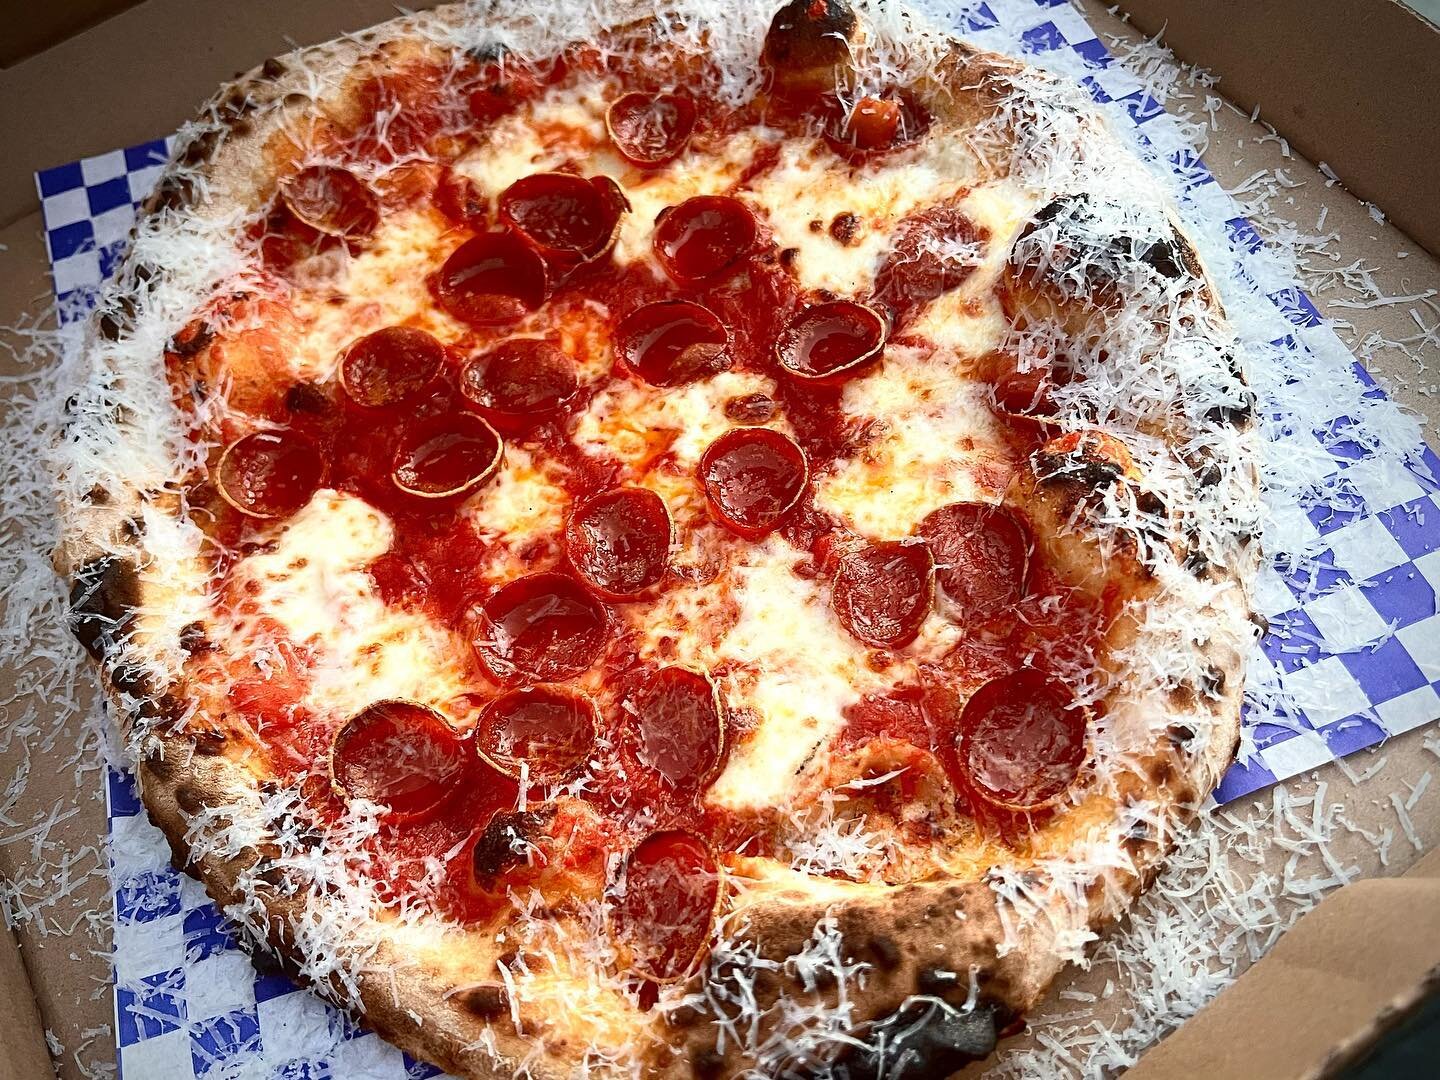 Pepperoni Sunshine&hellip;#pizza #chef #bake #pepperoni  #feed #befed #eat #local #cook #oakland #outhere